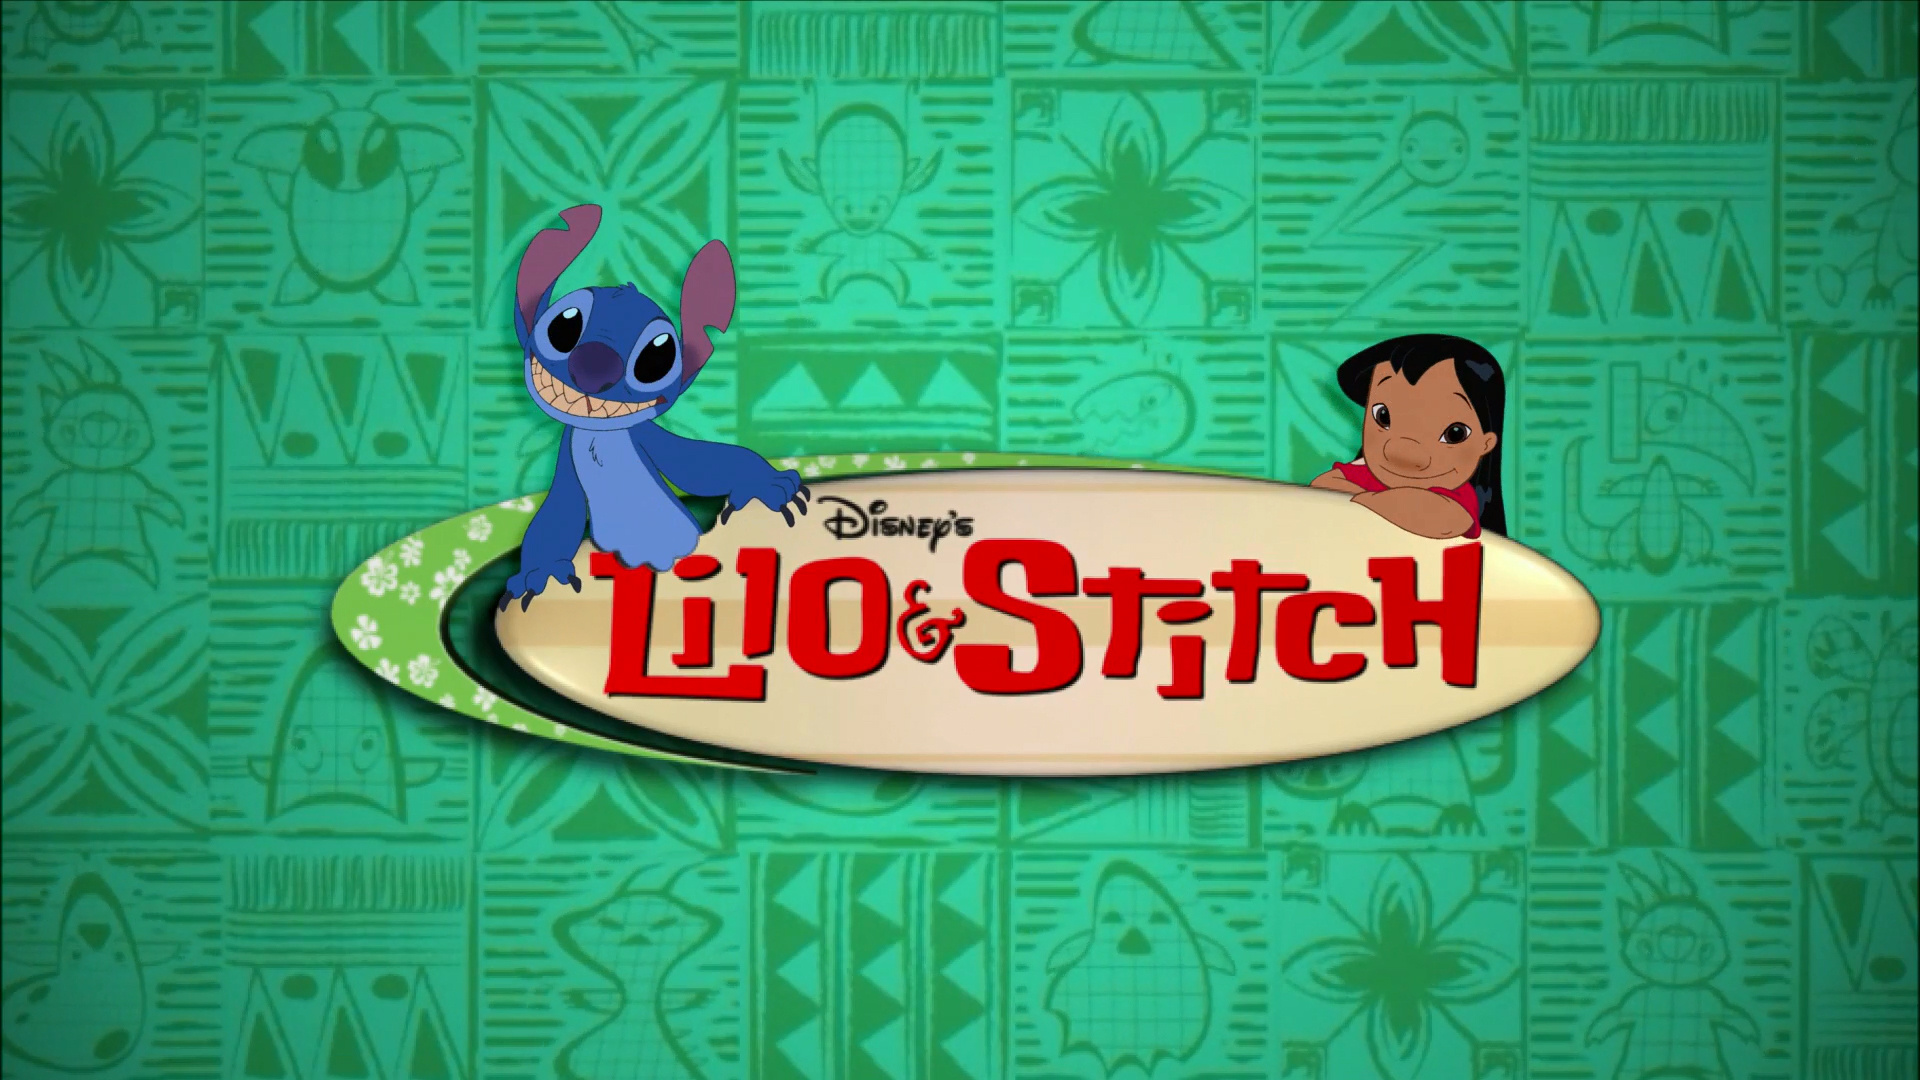 Lilo and Stitch series, Series 125, Nosy experiment, Nosy experiment episode, 1920x1080 Full HD Desktop